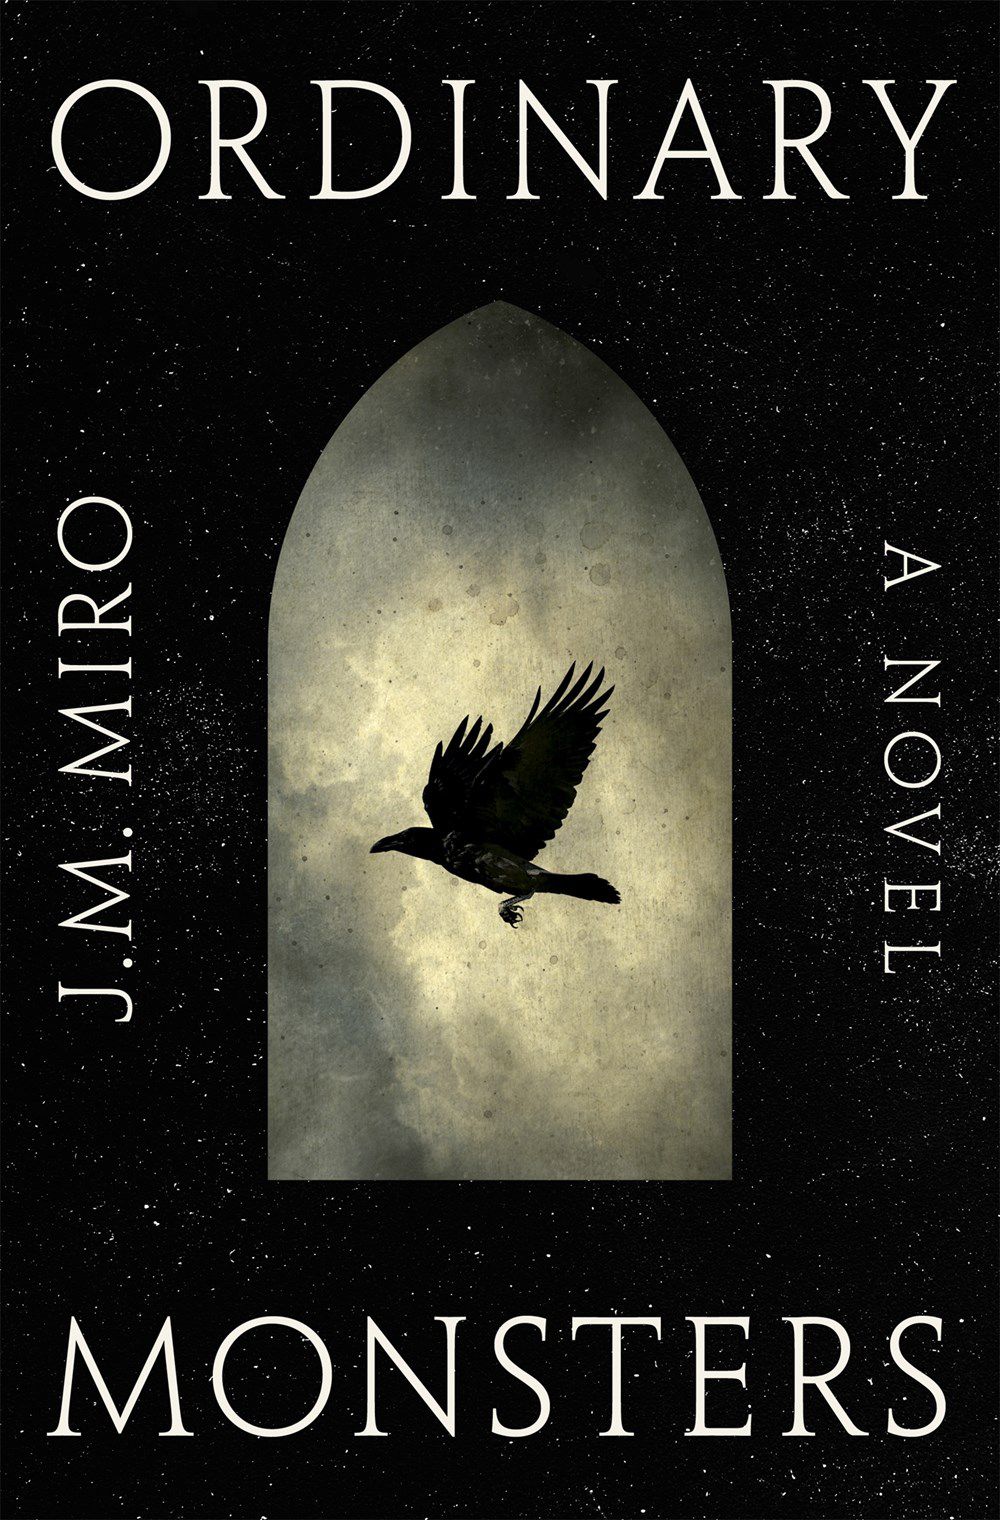 Cover image for Ordinary Monsters by JM Miro, featuring a black bird flying against the backdrop of clouds and the night sky.